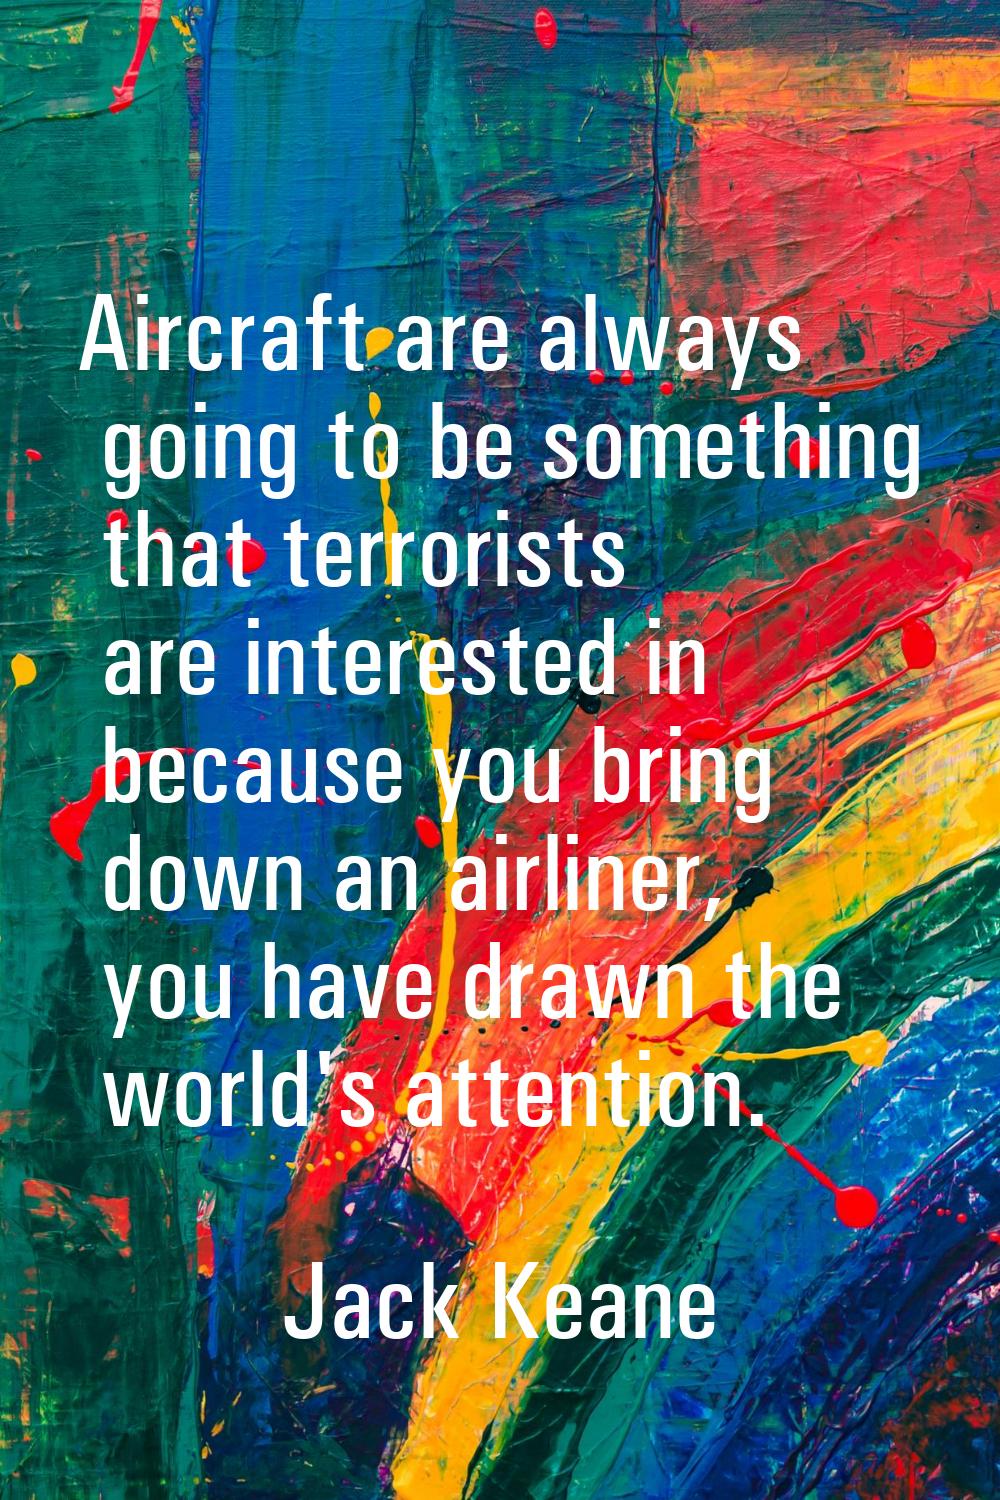 Aircraft are always going to be something that terrorists are interested in because you bring down 